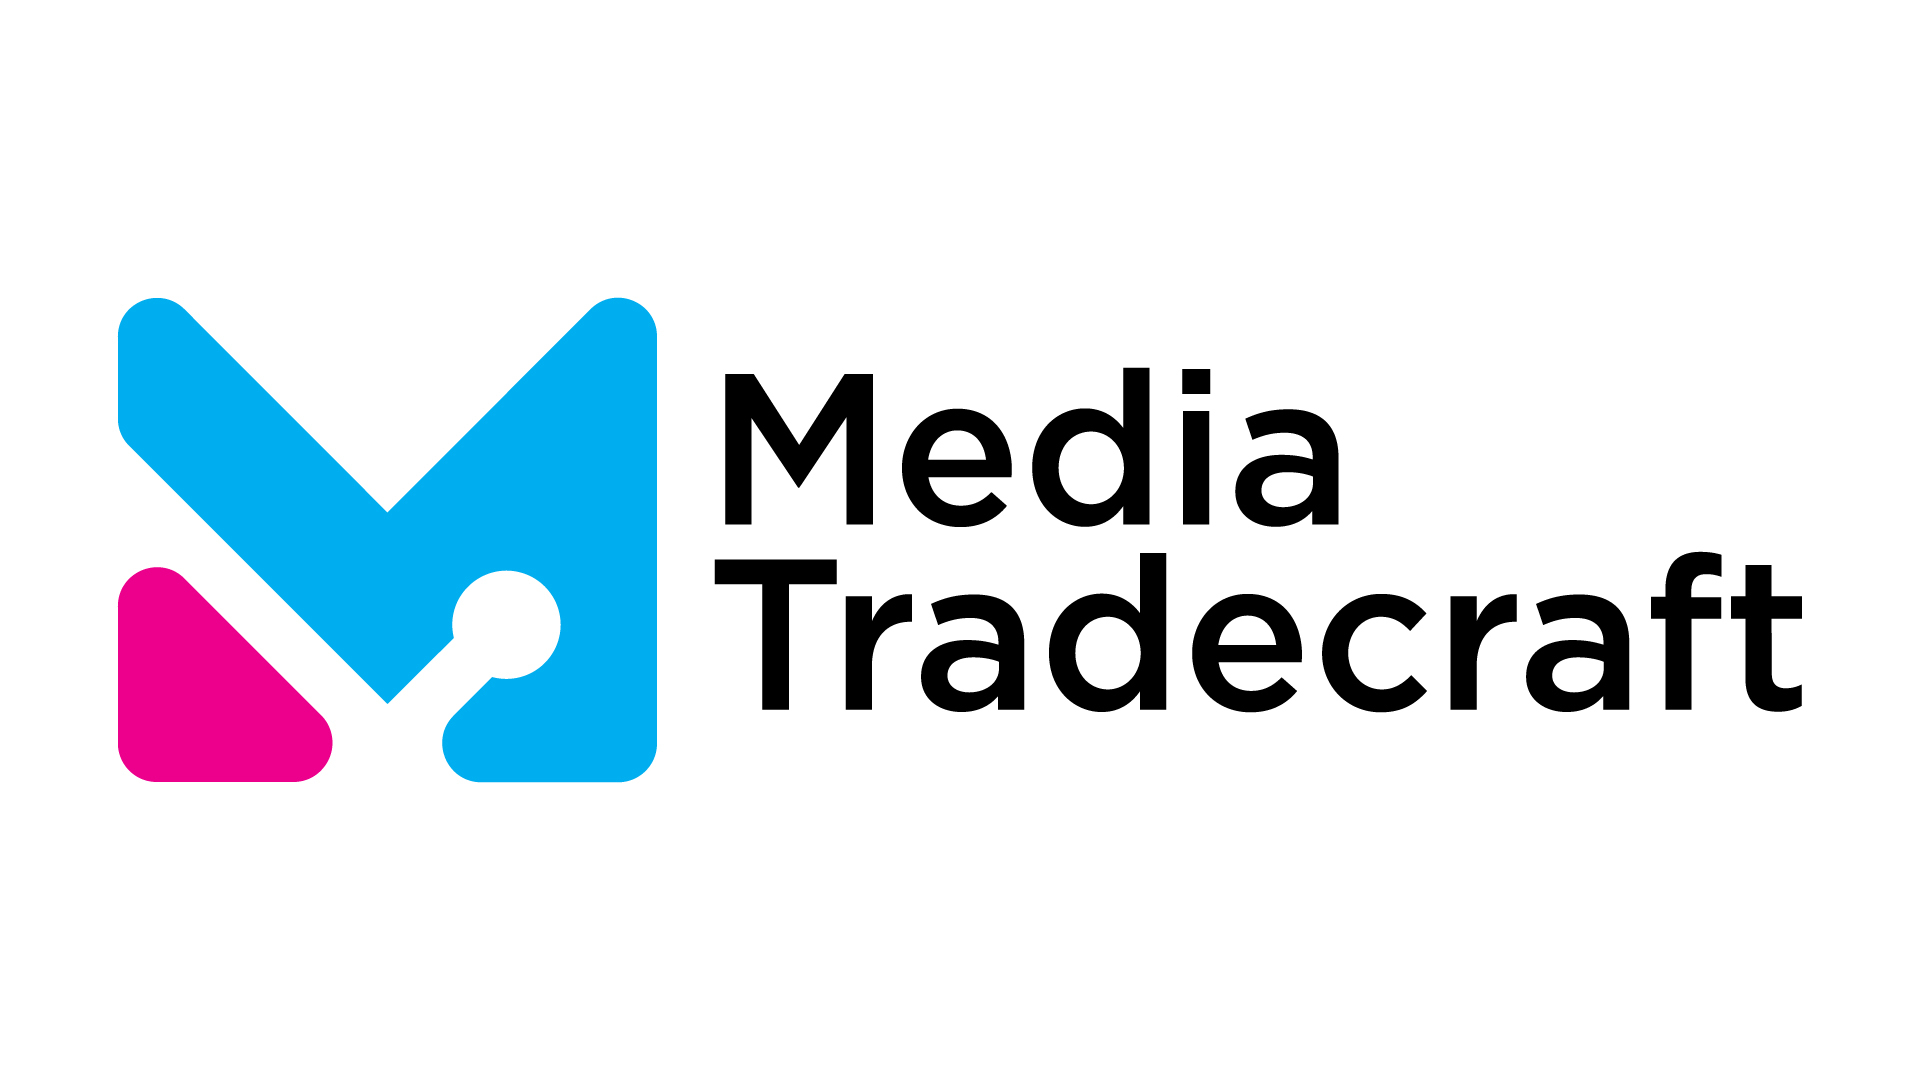 Media Tradecraft Ranks No. 212 on the Inc. 5000 with Three-Year Revenue Growth of 2,640% 